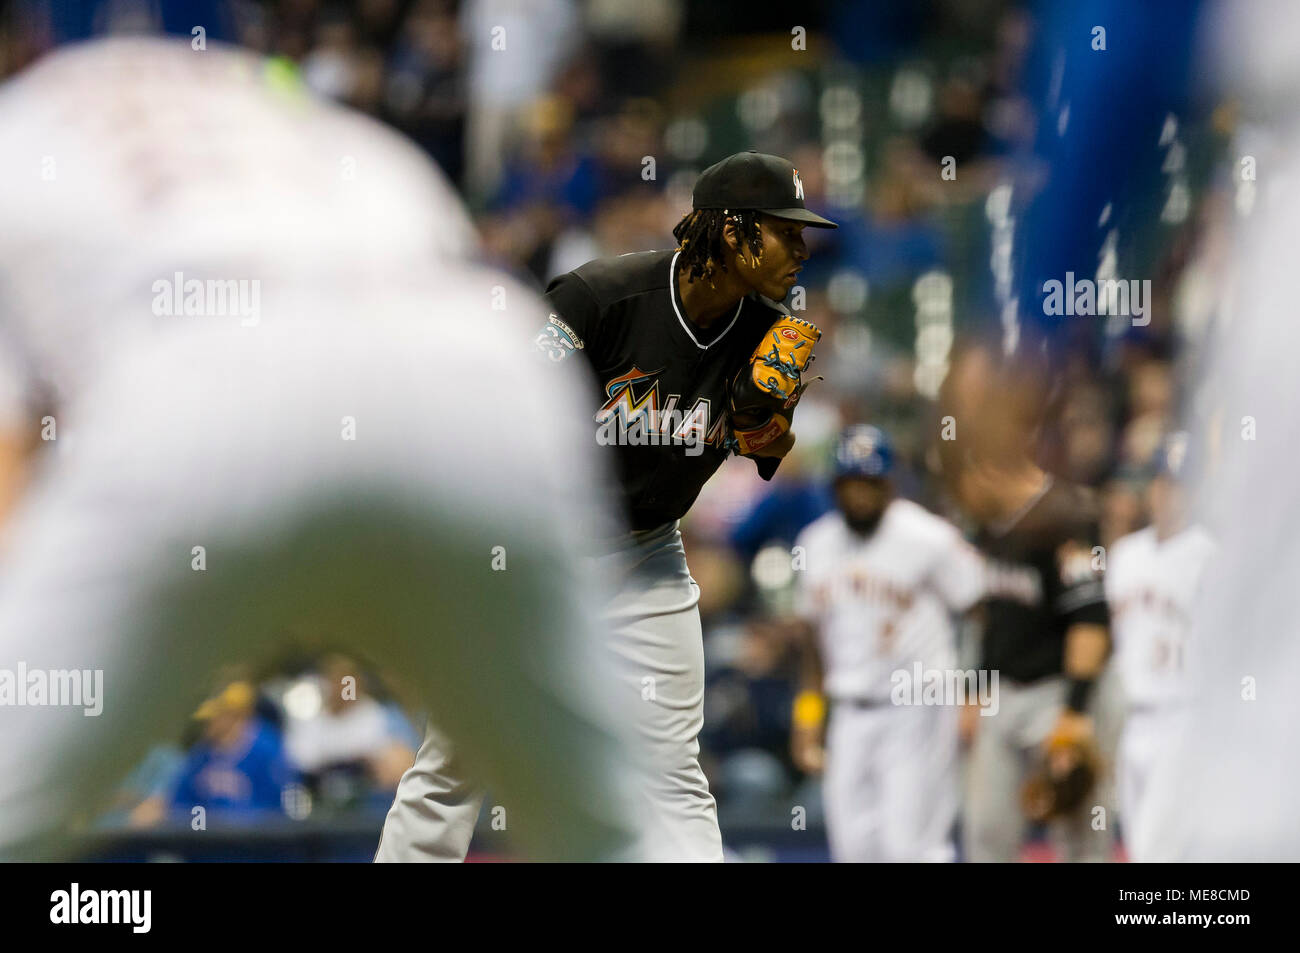 Milwaukee, WI, USA. 21st Apr, 2018. Miami Marlins starting pitcher Jose Urena #62 with runners on first and third base during the Major League Baseball game between the Milwaukee Brewers and the Miami Marlins at Miller Park in Milwaukee, WI. John Fisher/CSM/Alamy Live News Stock Photo